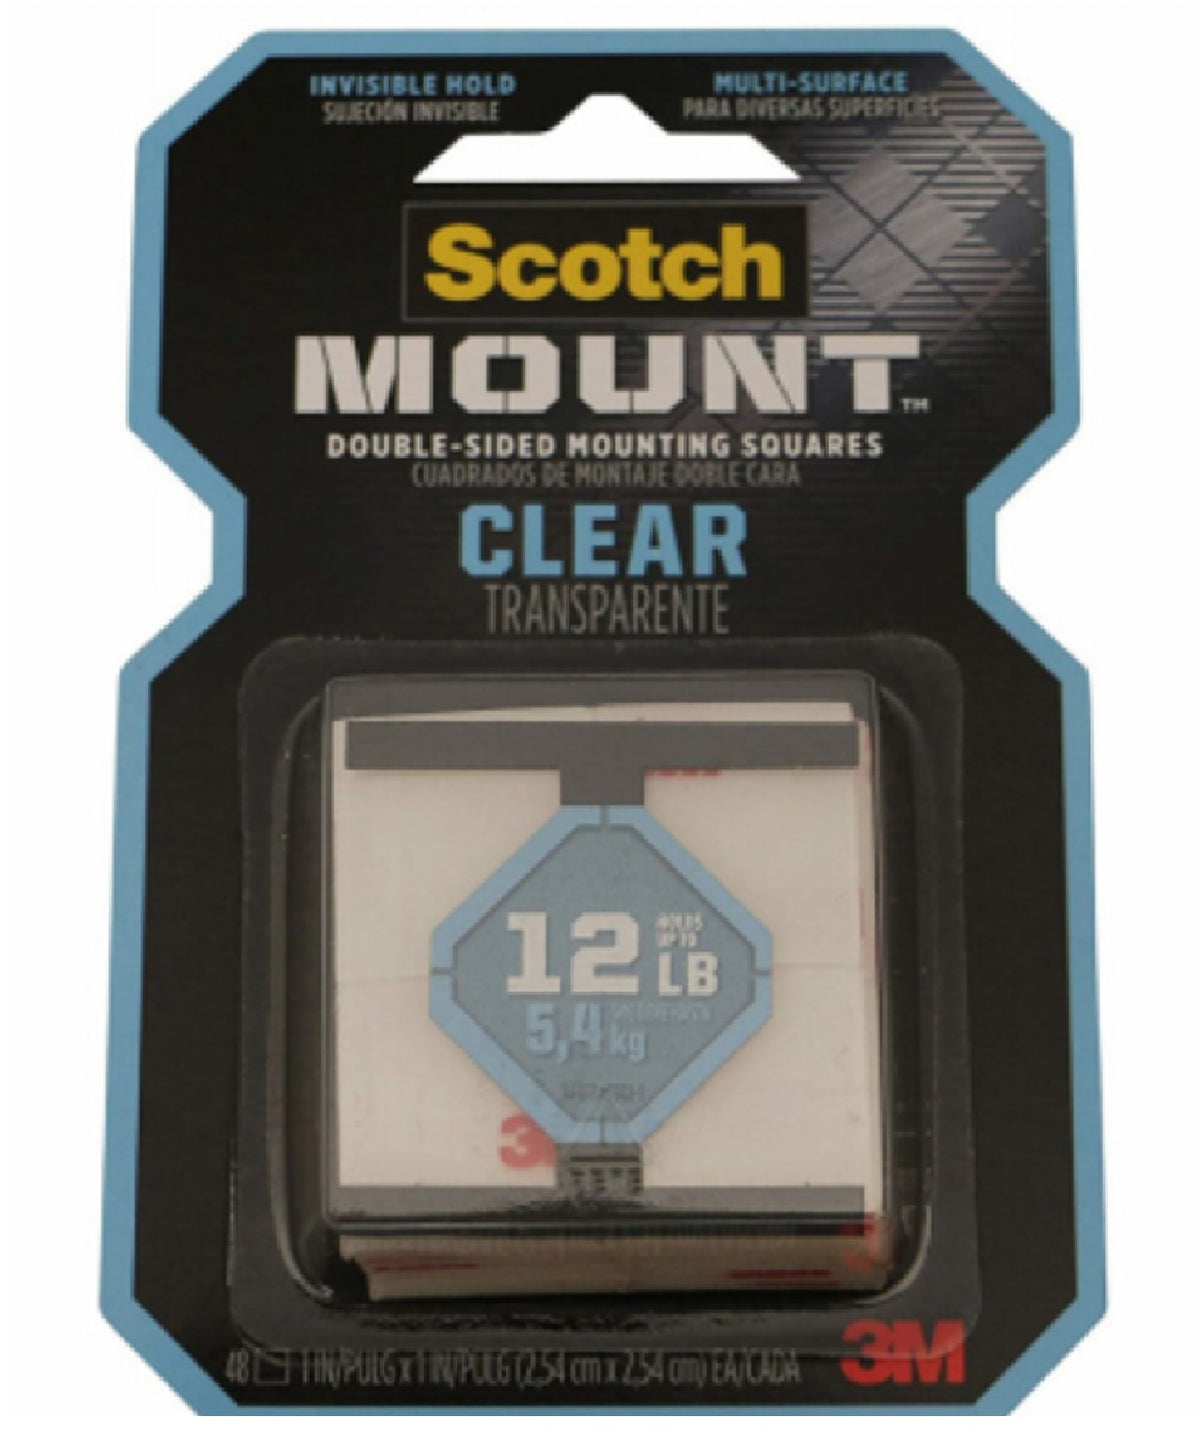 Scotch 410H-SQ-48 Mount Double-Sided Mounting Squares Tape, Clear